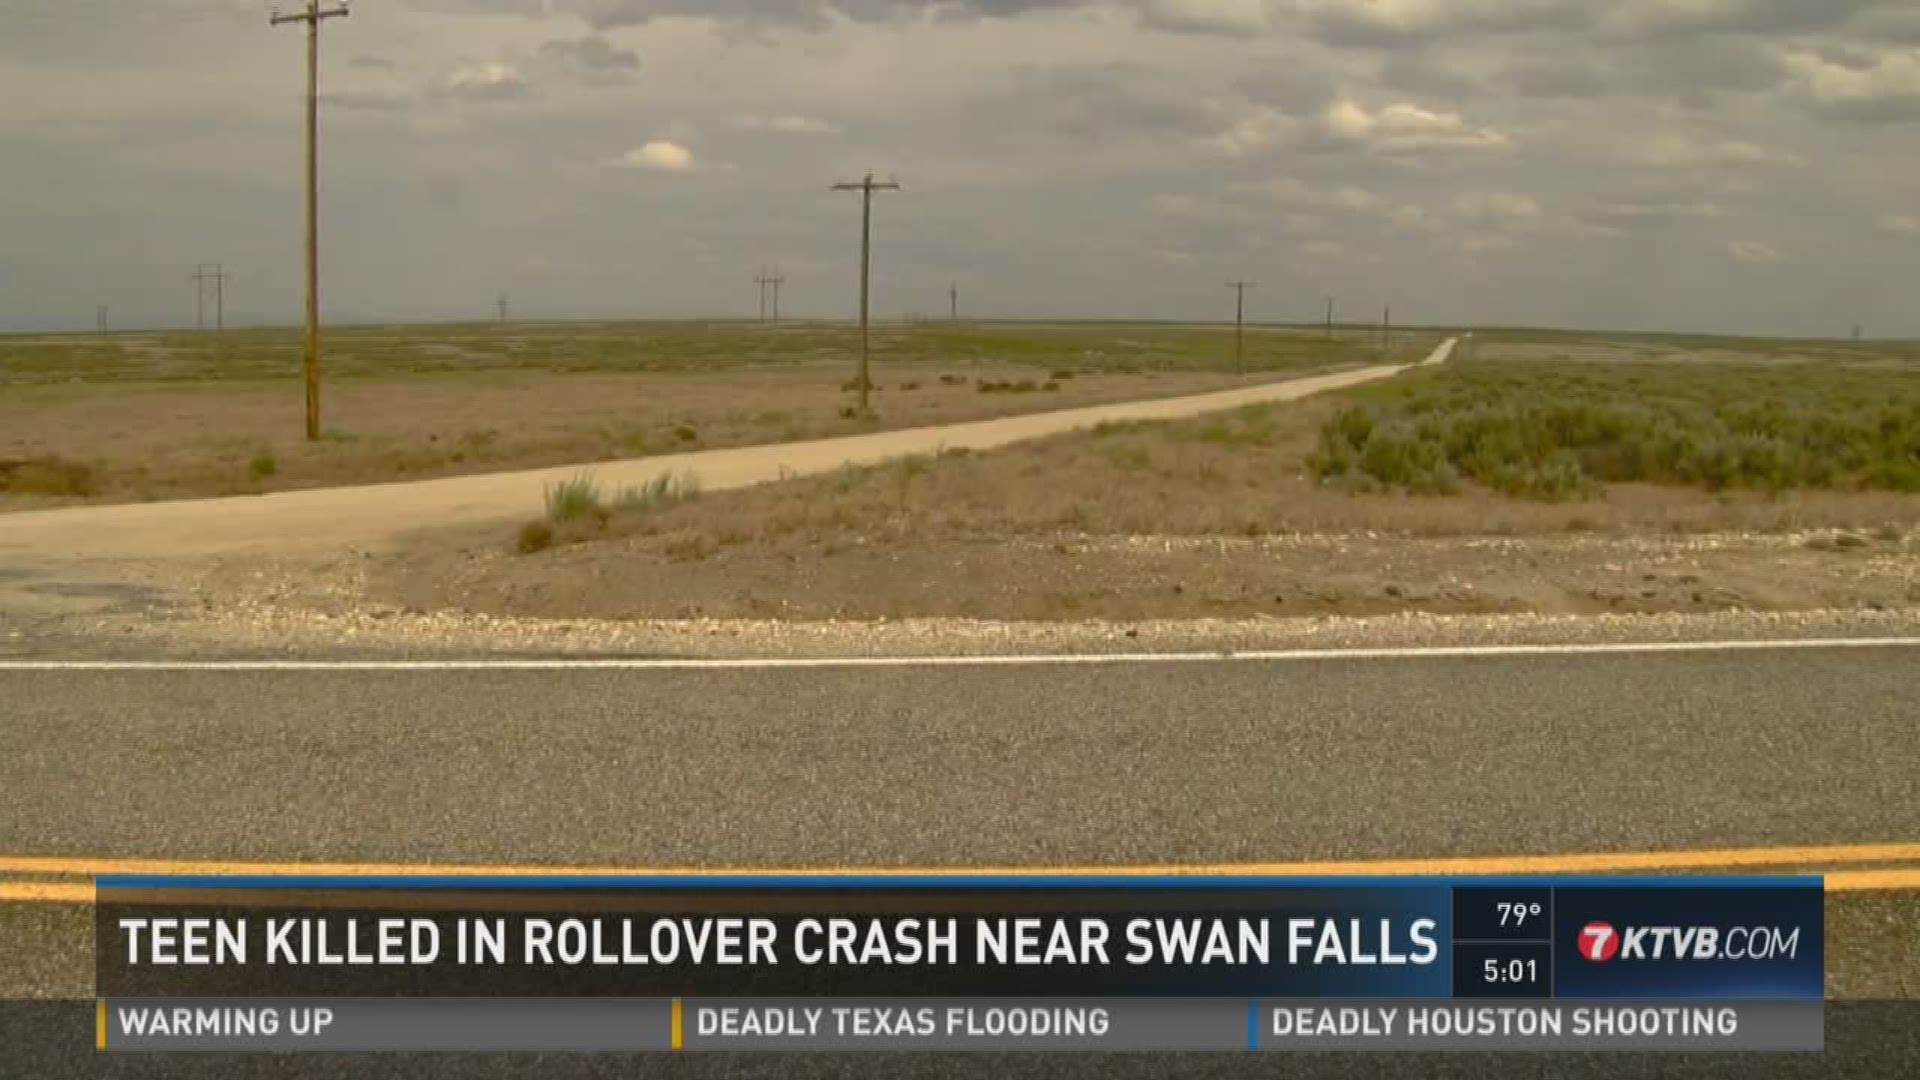 A 17 year-old died, and two others were injured, in a rollover crash just hours after he graduated high school.